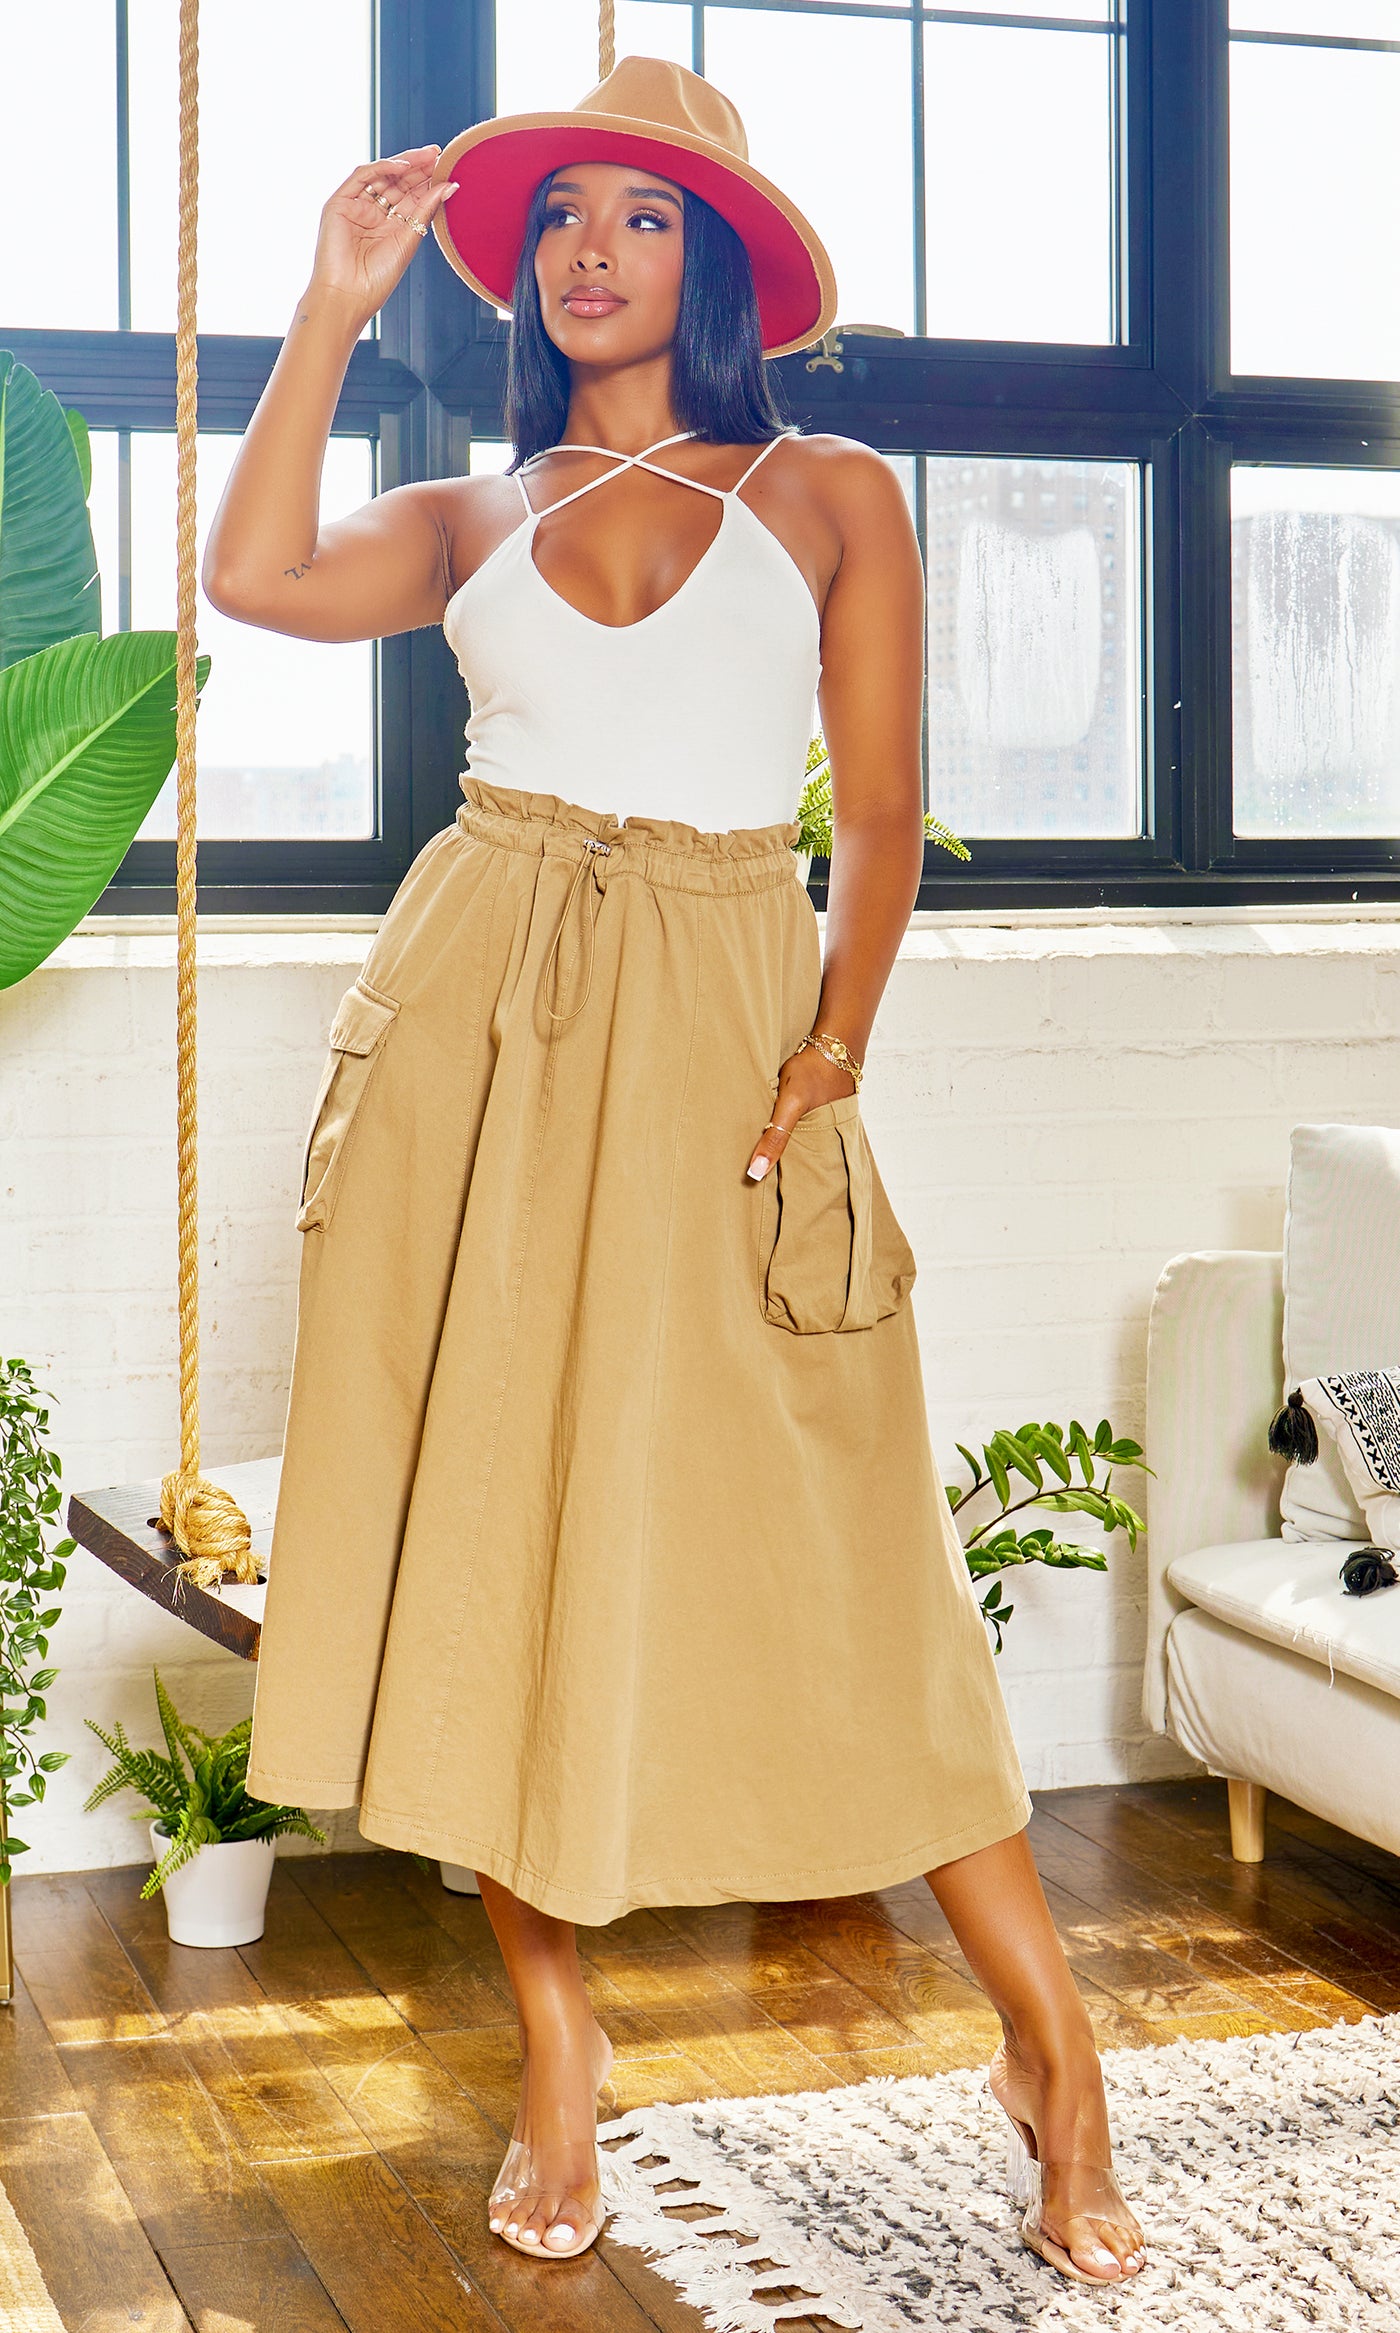 Enigma - Simply Classy Skirt's Allure Khaki - Cutely Covered